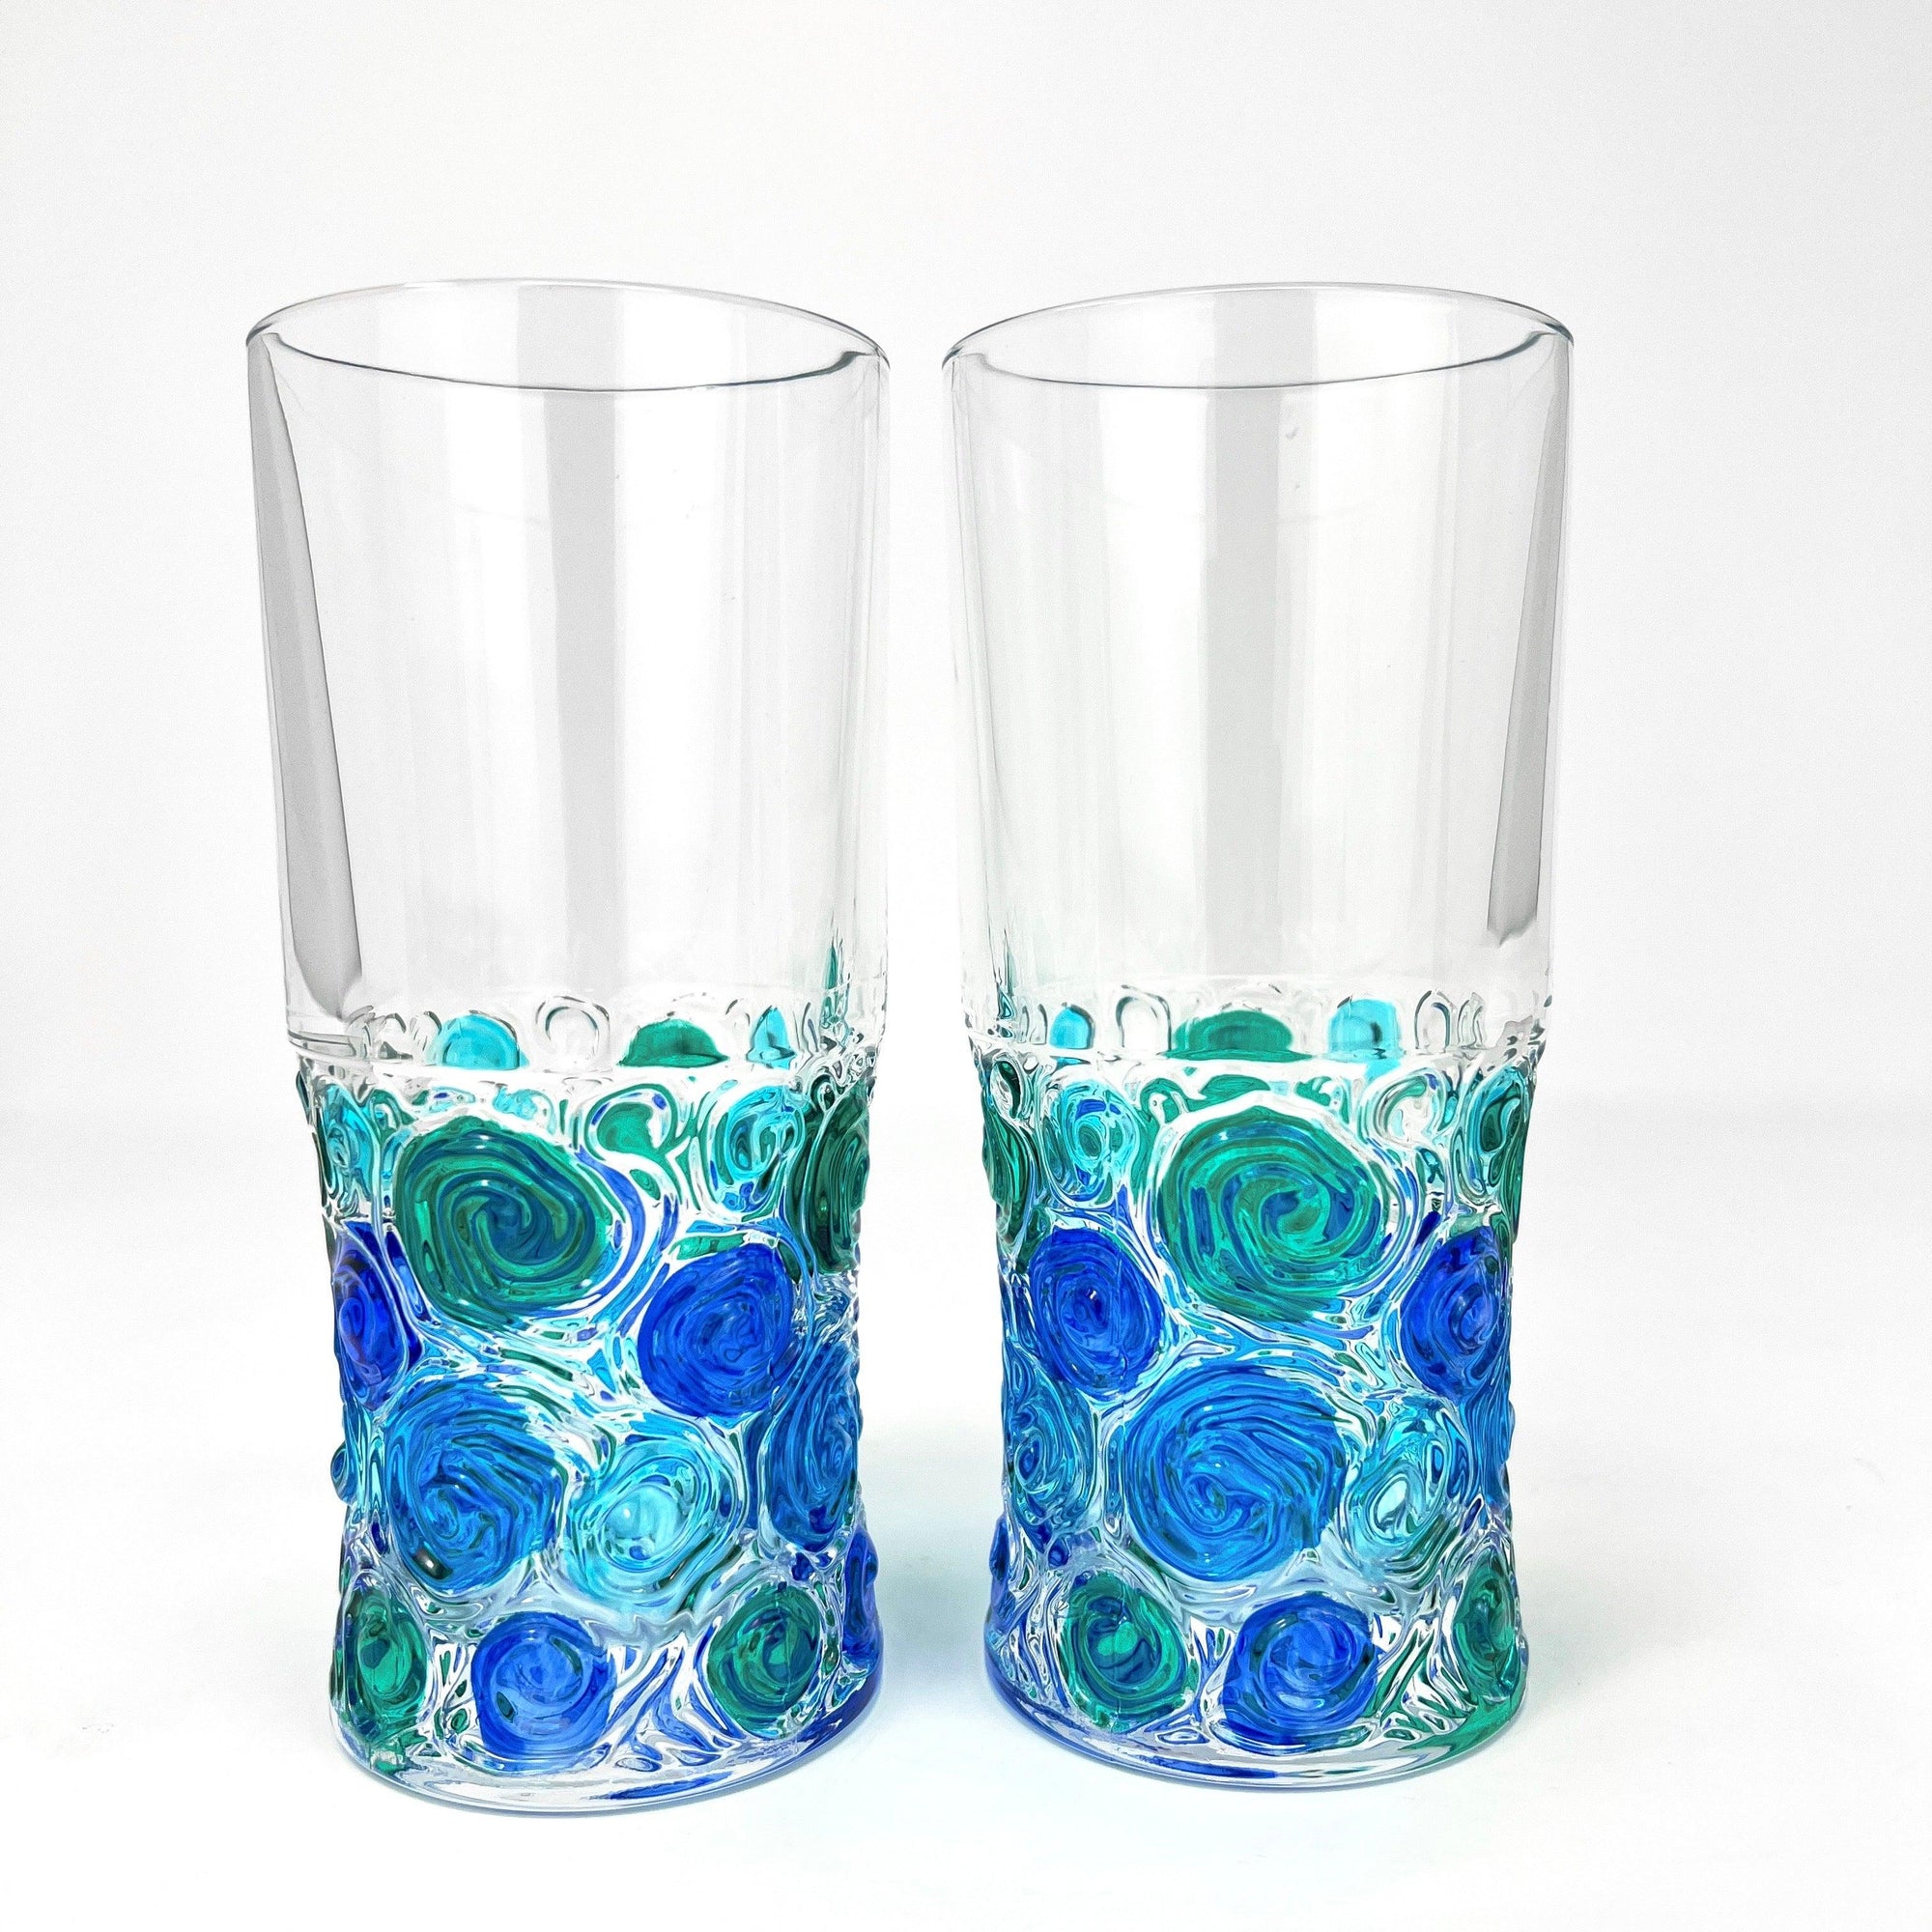 Two Italian Crystal tall drinking glasses with bright blue, green, and turquoise swirls of color on the bottom half.